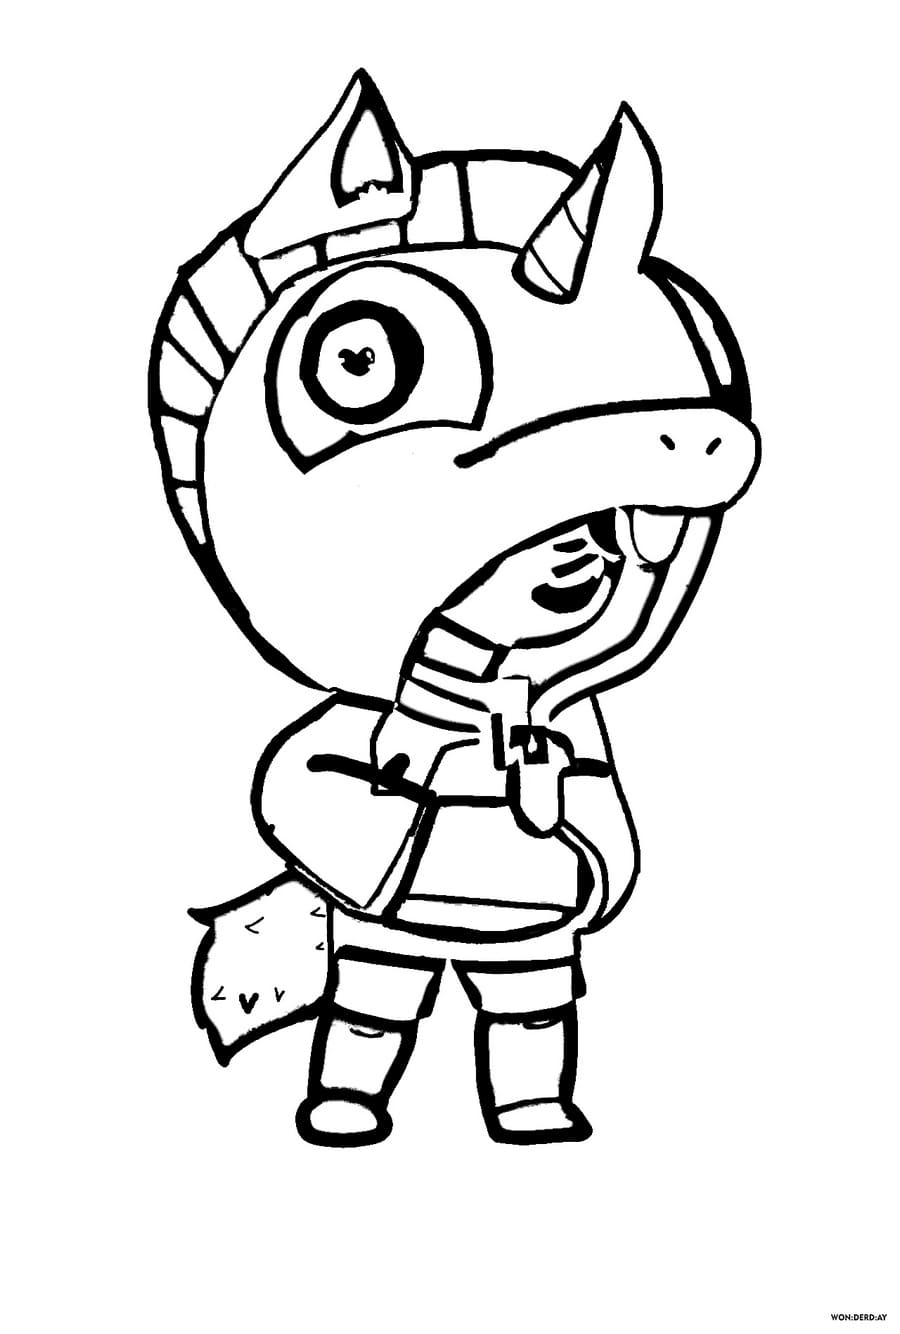 Leon Brawl Stars Coloring Pages Print For Free Wonder Day Coloring Pages For Children And Adults - how to draw leon in brawl stars